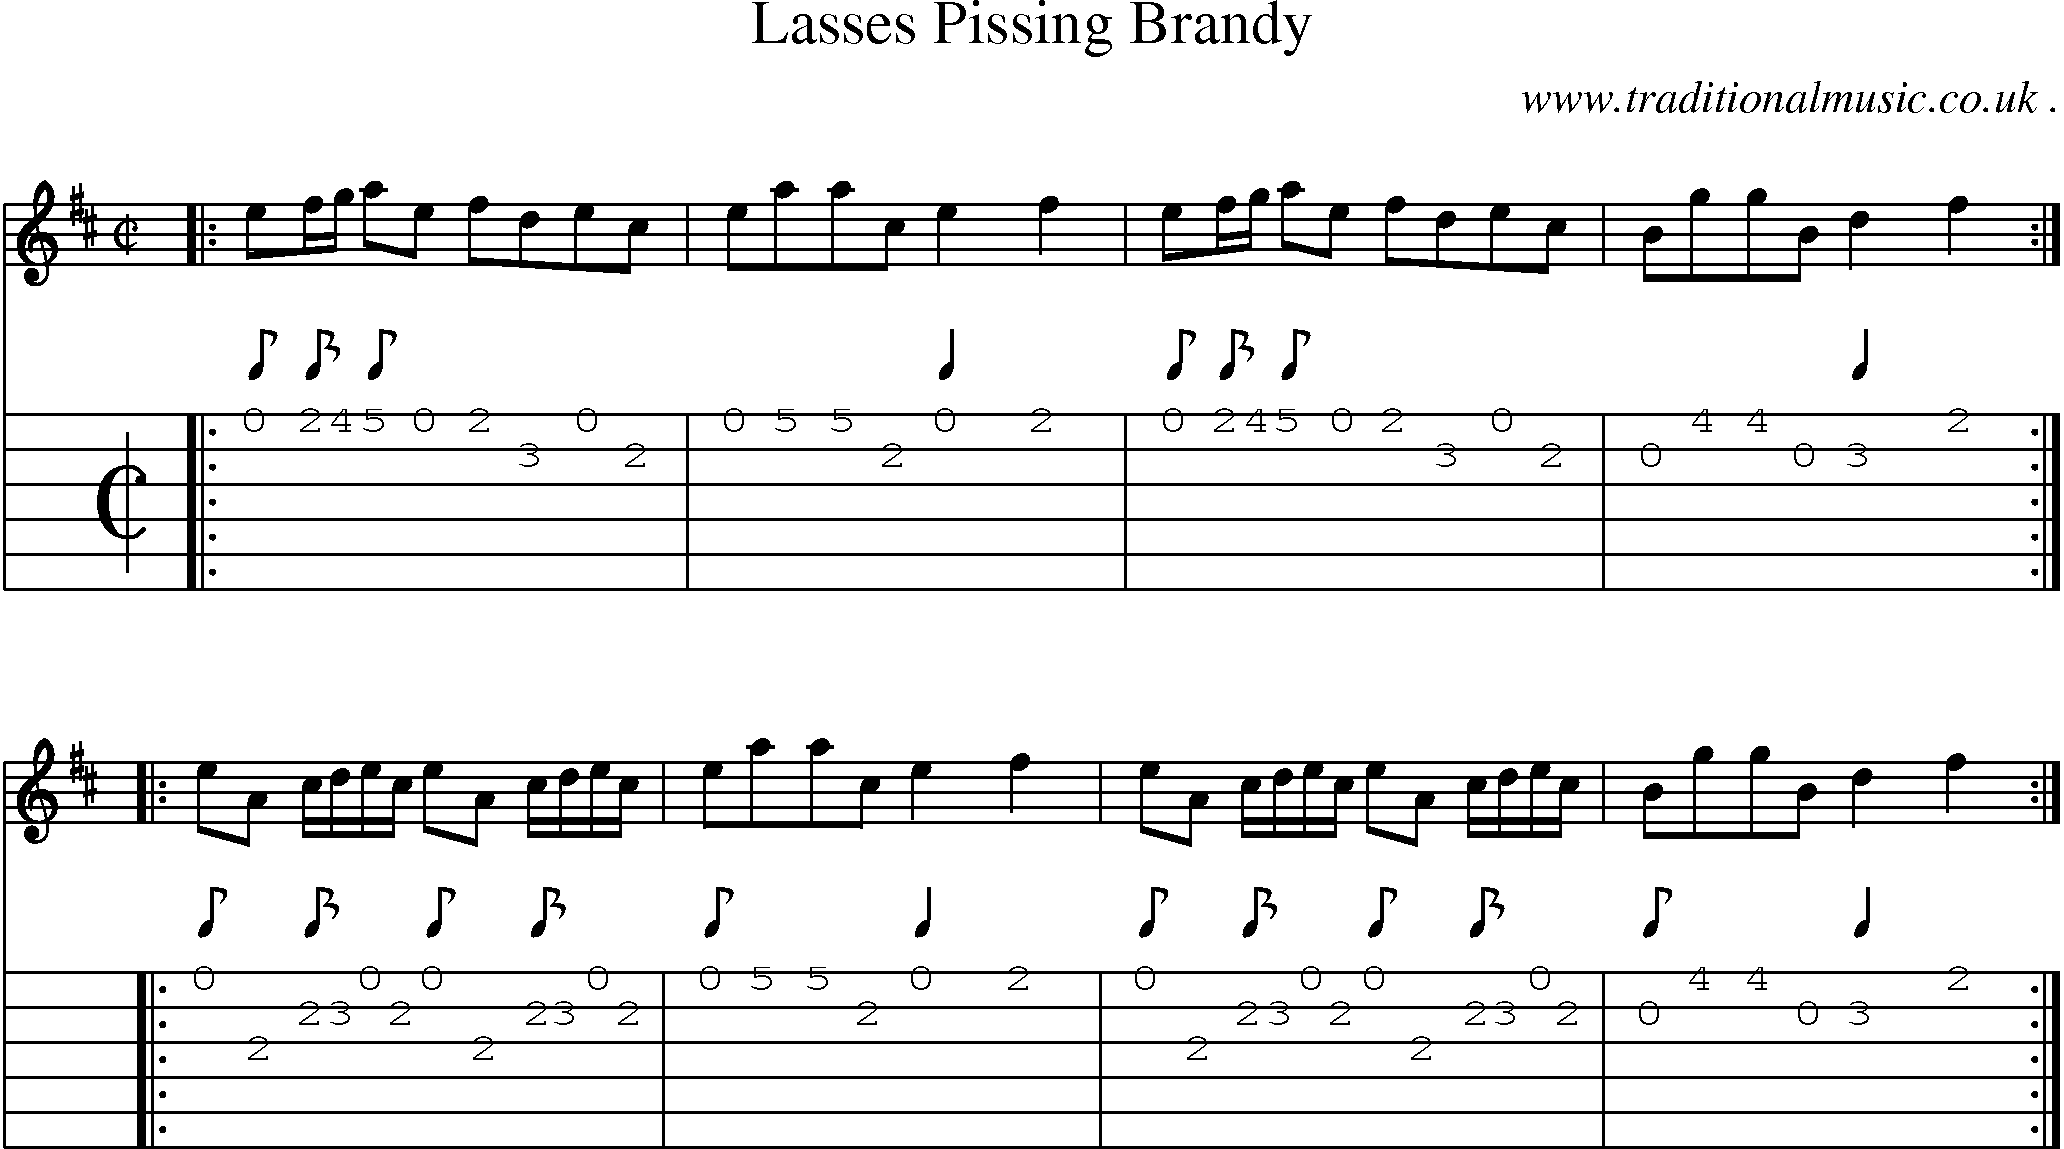 Sheet-music  score, Chords and Guitar Tabs for Lasses Pissing Brandy